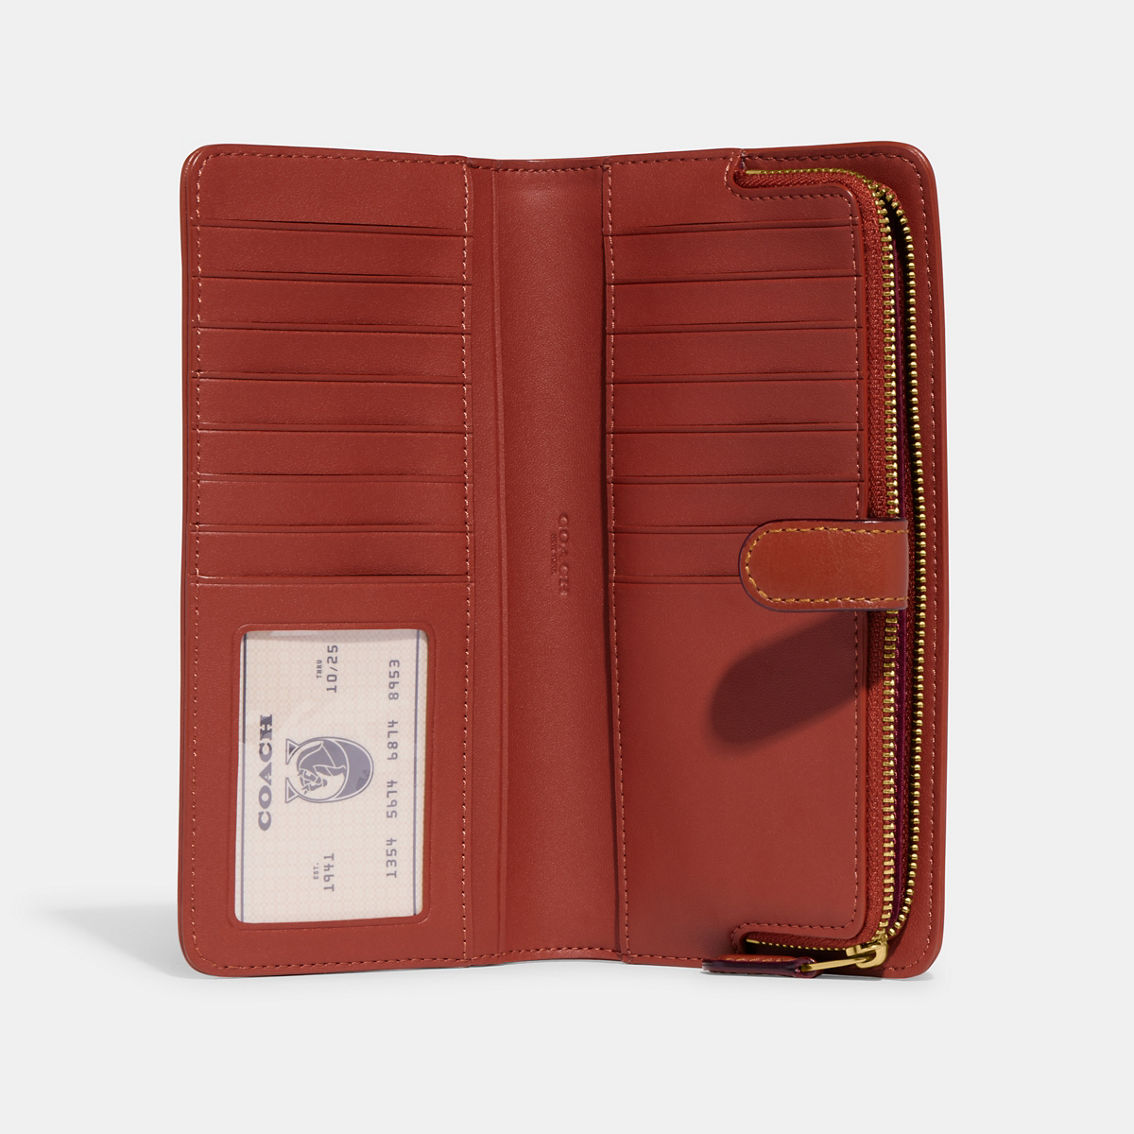 COACH Coated Canvas Signature Skinny Wallet - Image 3 of 3